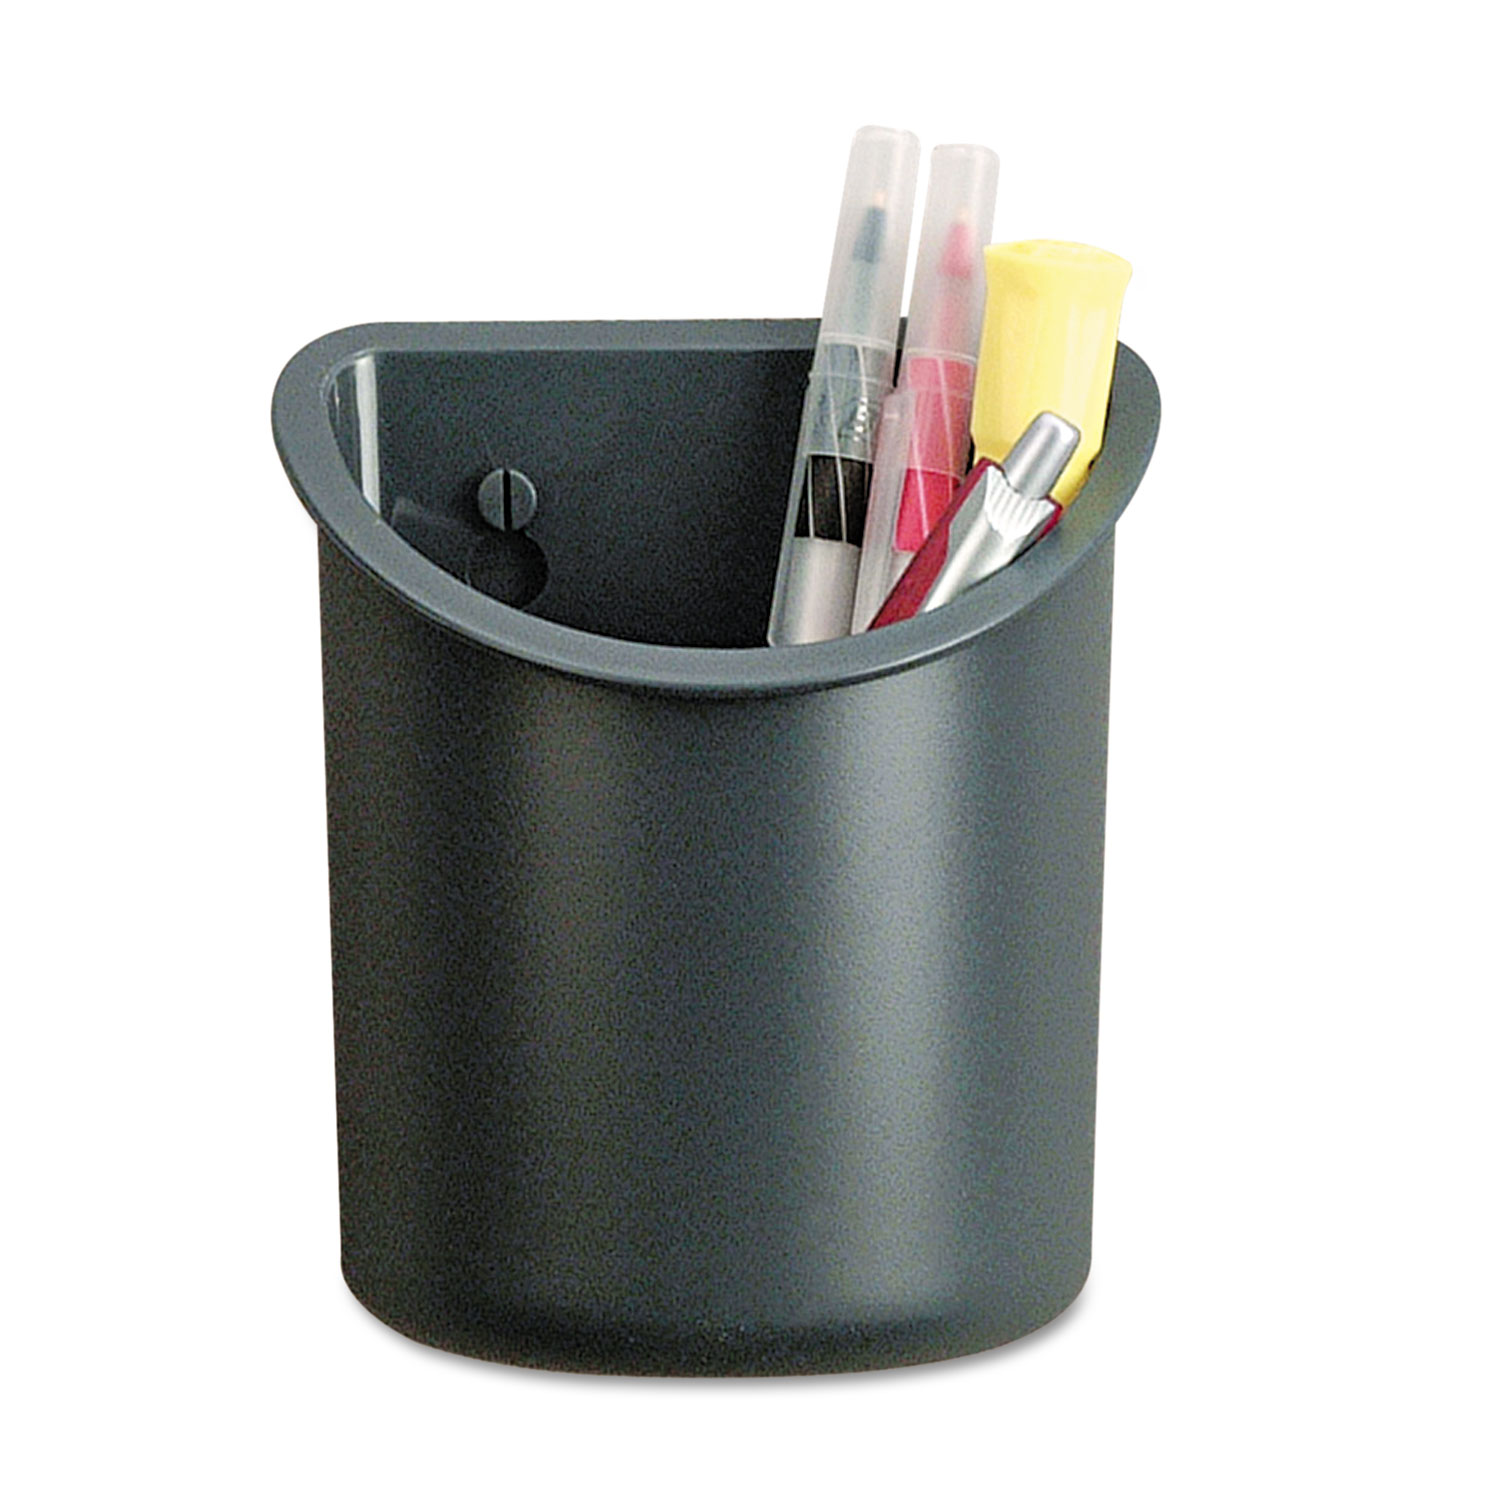  Universal UNV08193 Recycled Plastic Cubicle Pencil Cup, 4 1/4 x 2 1/2 x 5, Charcoal (UNV08193) 